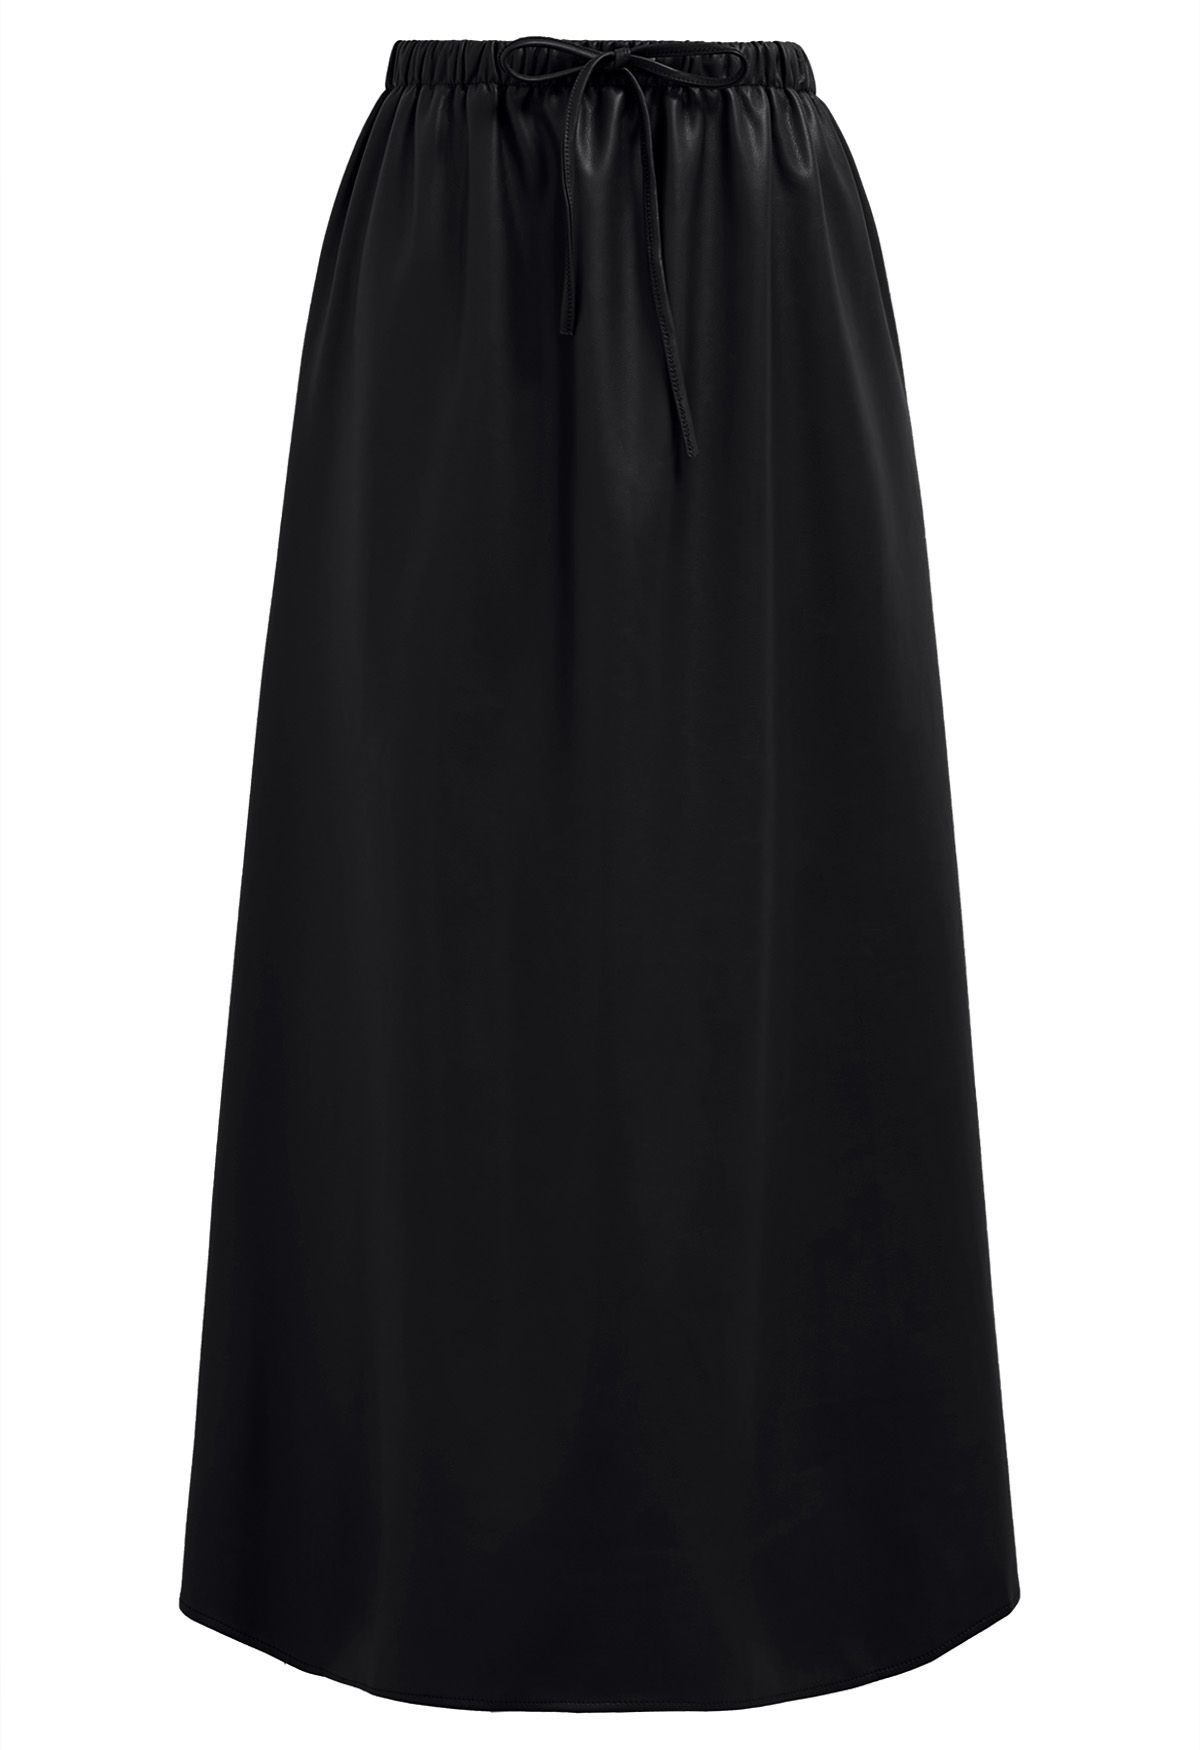 Drawstring Waist Faux Leather Maxi Skirt in Black | Chicwish